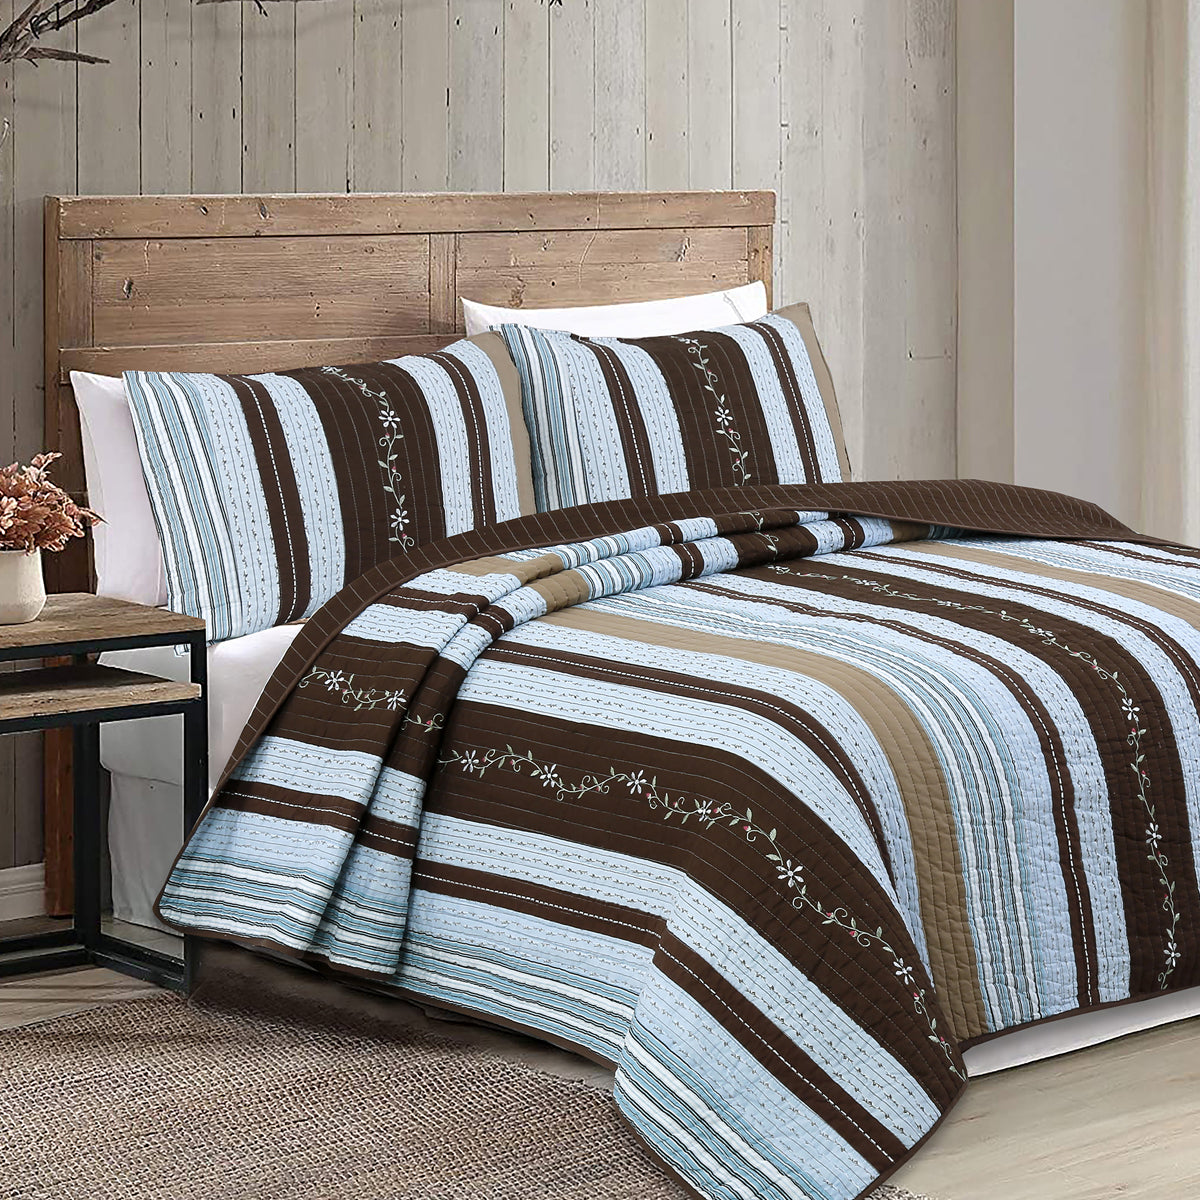 Mary Ann Stripe Real Patchwork Cotton 3-piece Reversible Quilt Bedding Set